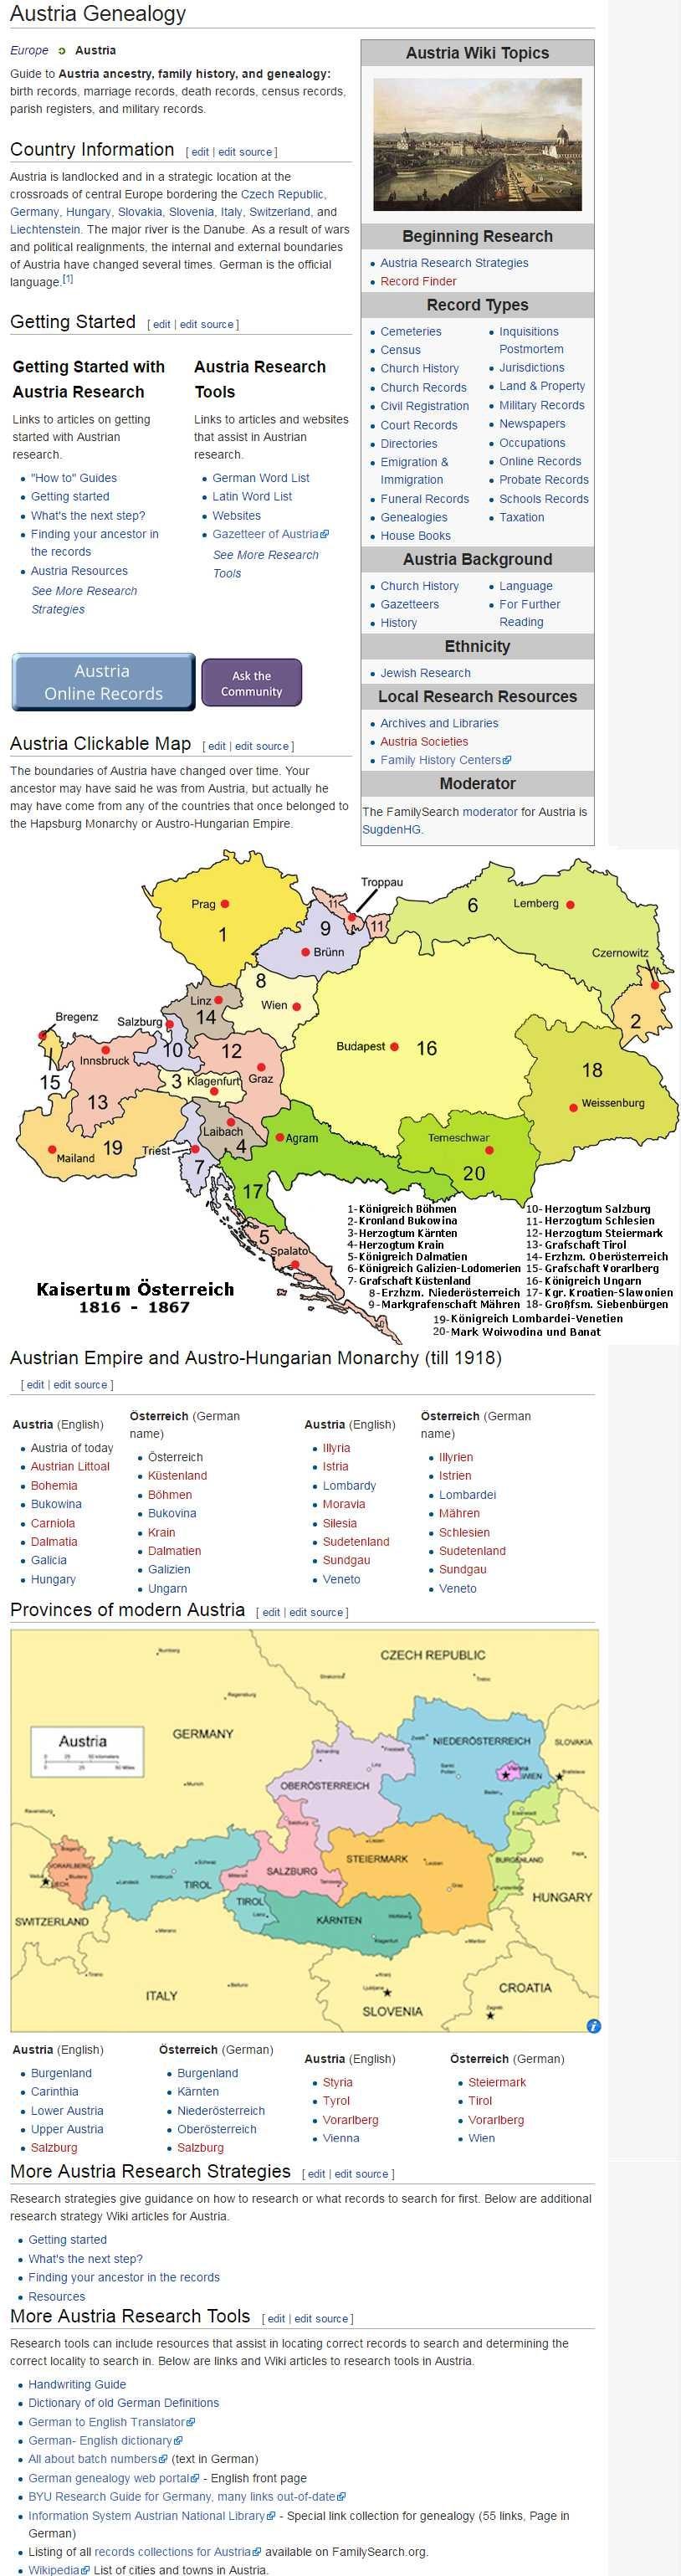 Browse by Country: (Continued) Return to the Wiki home page and click on Europe on the map. Find Austria on the map and click on it or use the list of countries under Central Europe and click Austria.